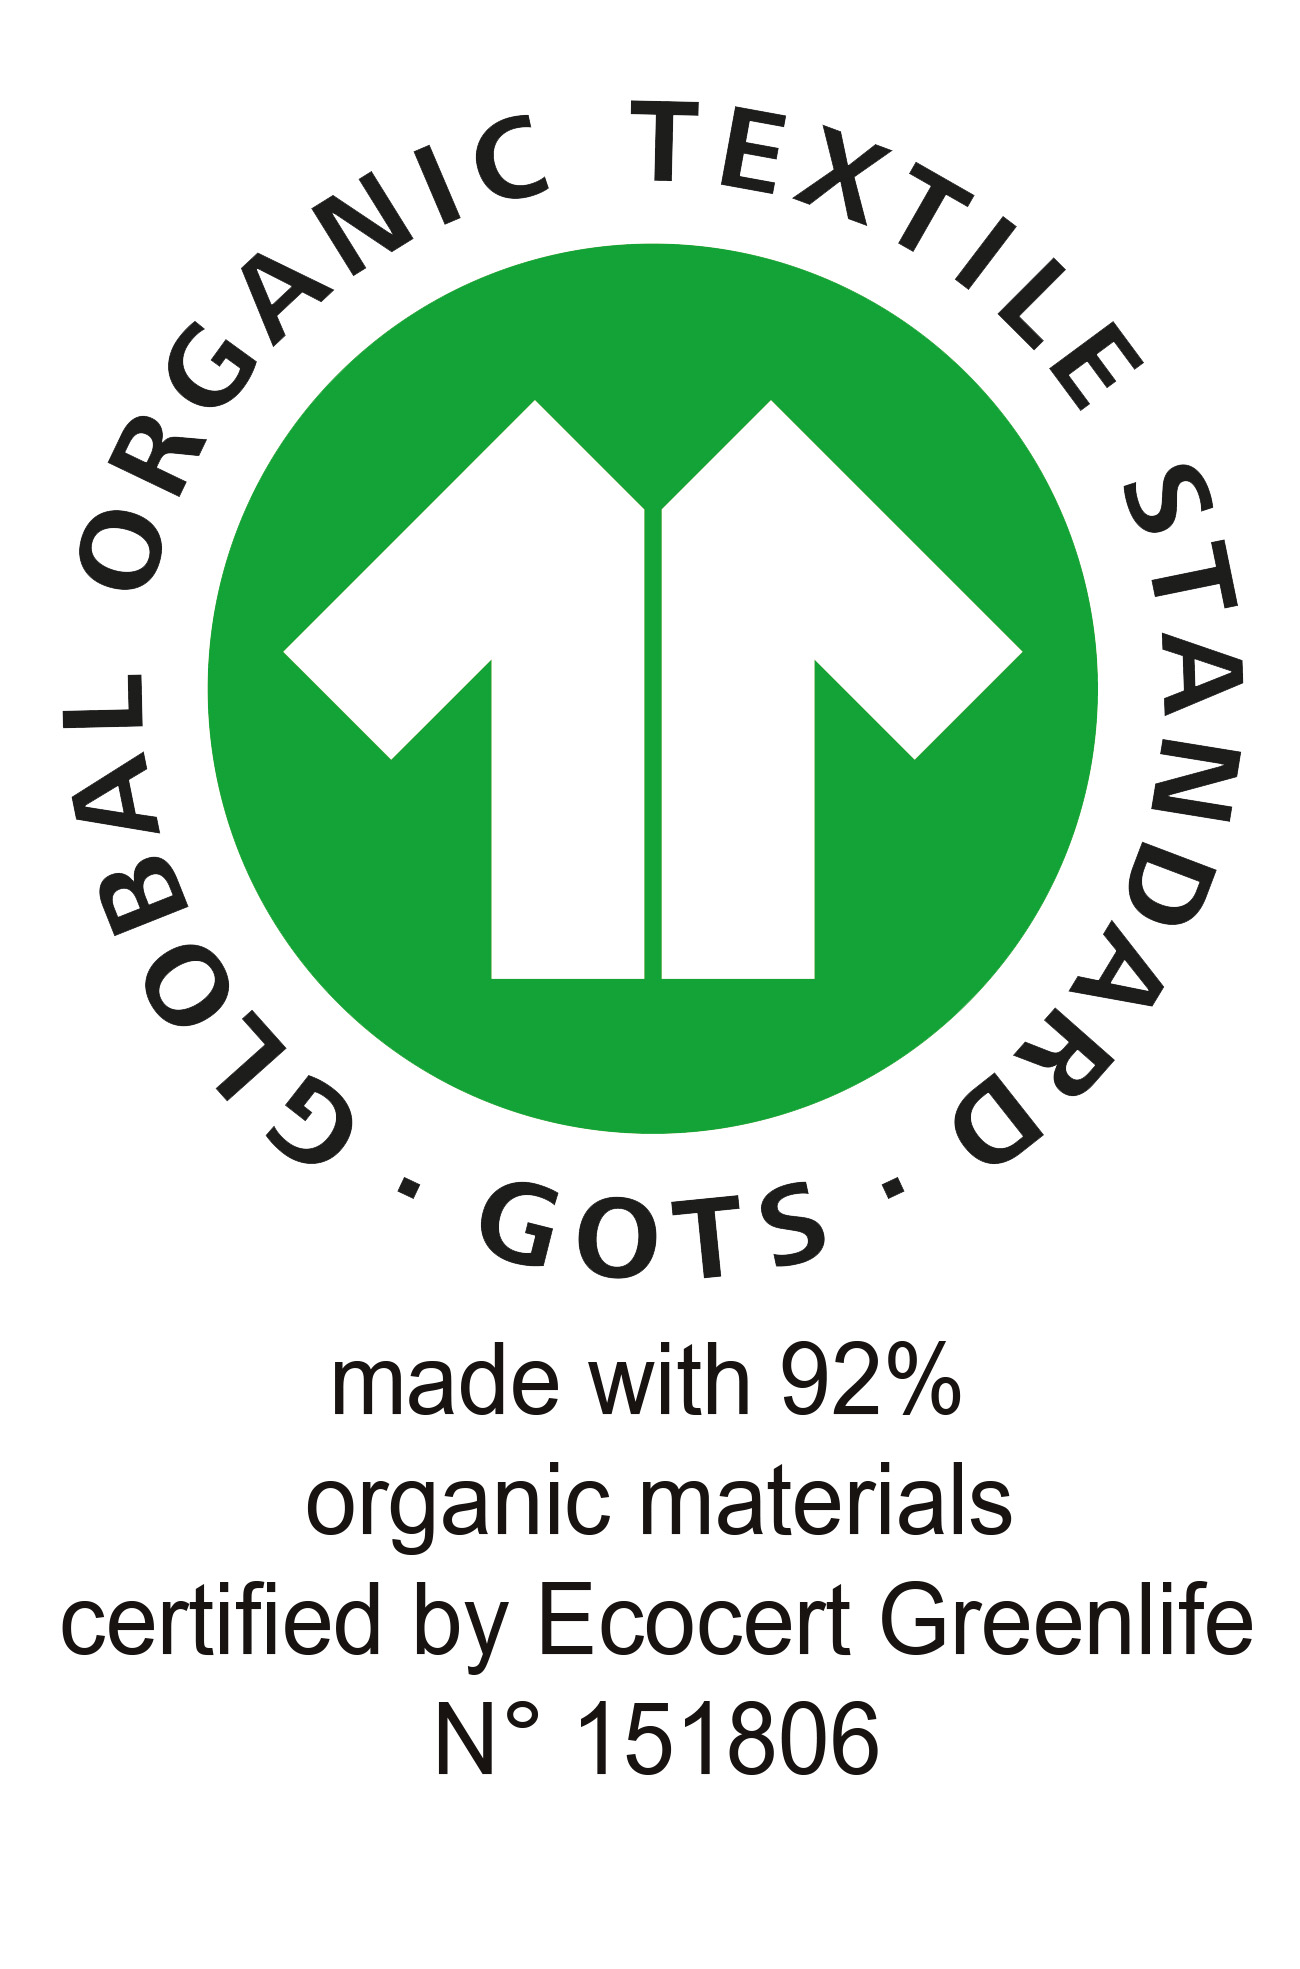 92% organic certified by Ecocert Greenlife N° 151806